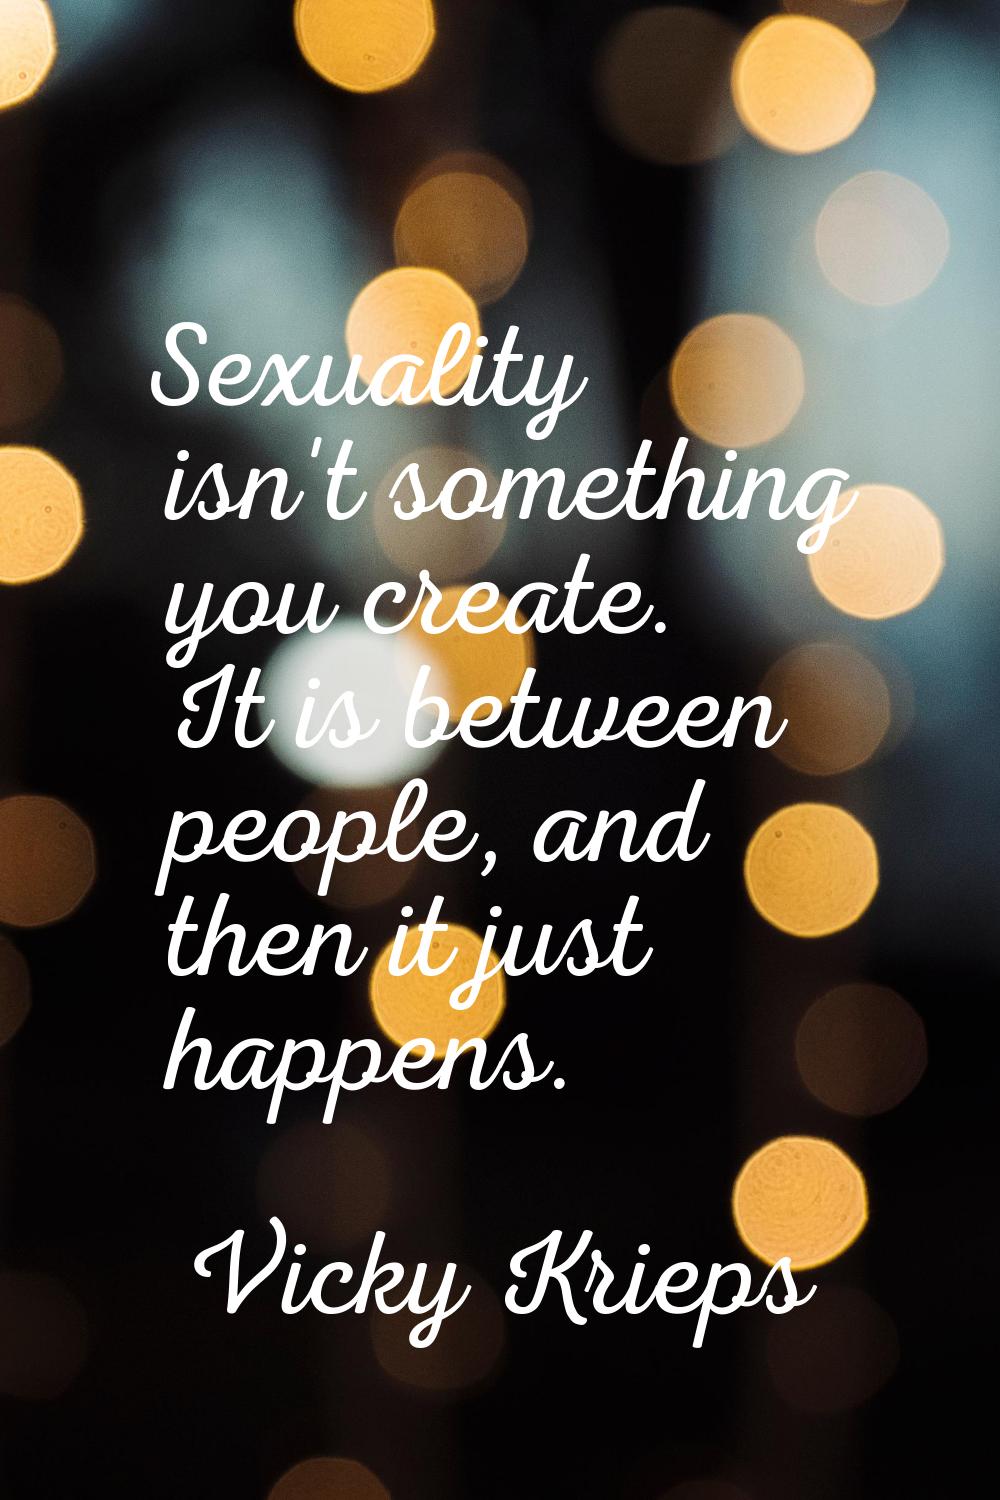 Sexuality isn't something you create. It is between people, and then it just happens.